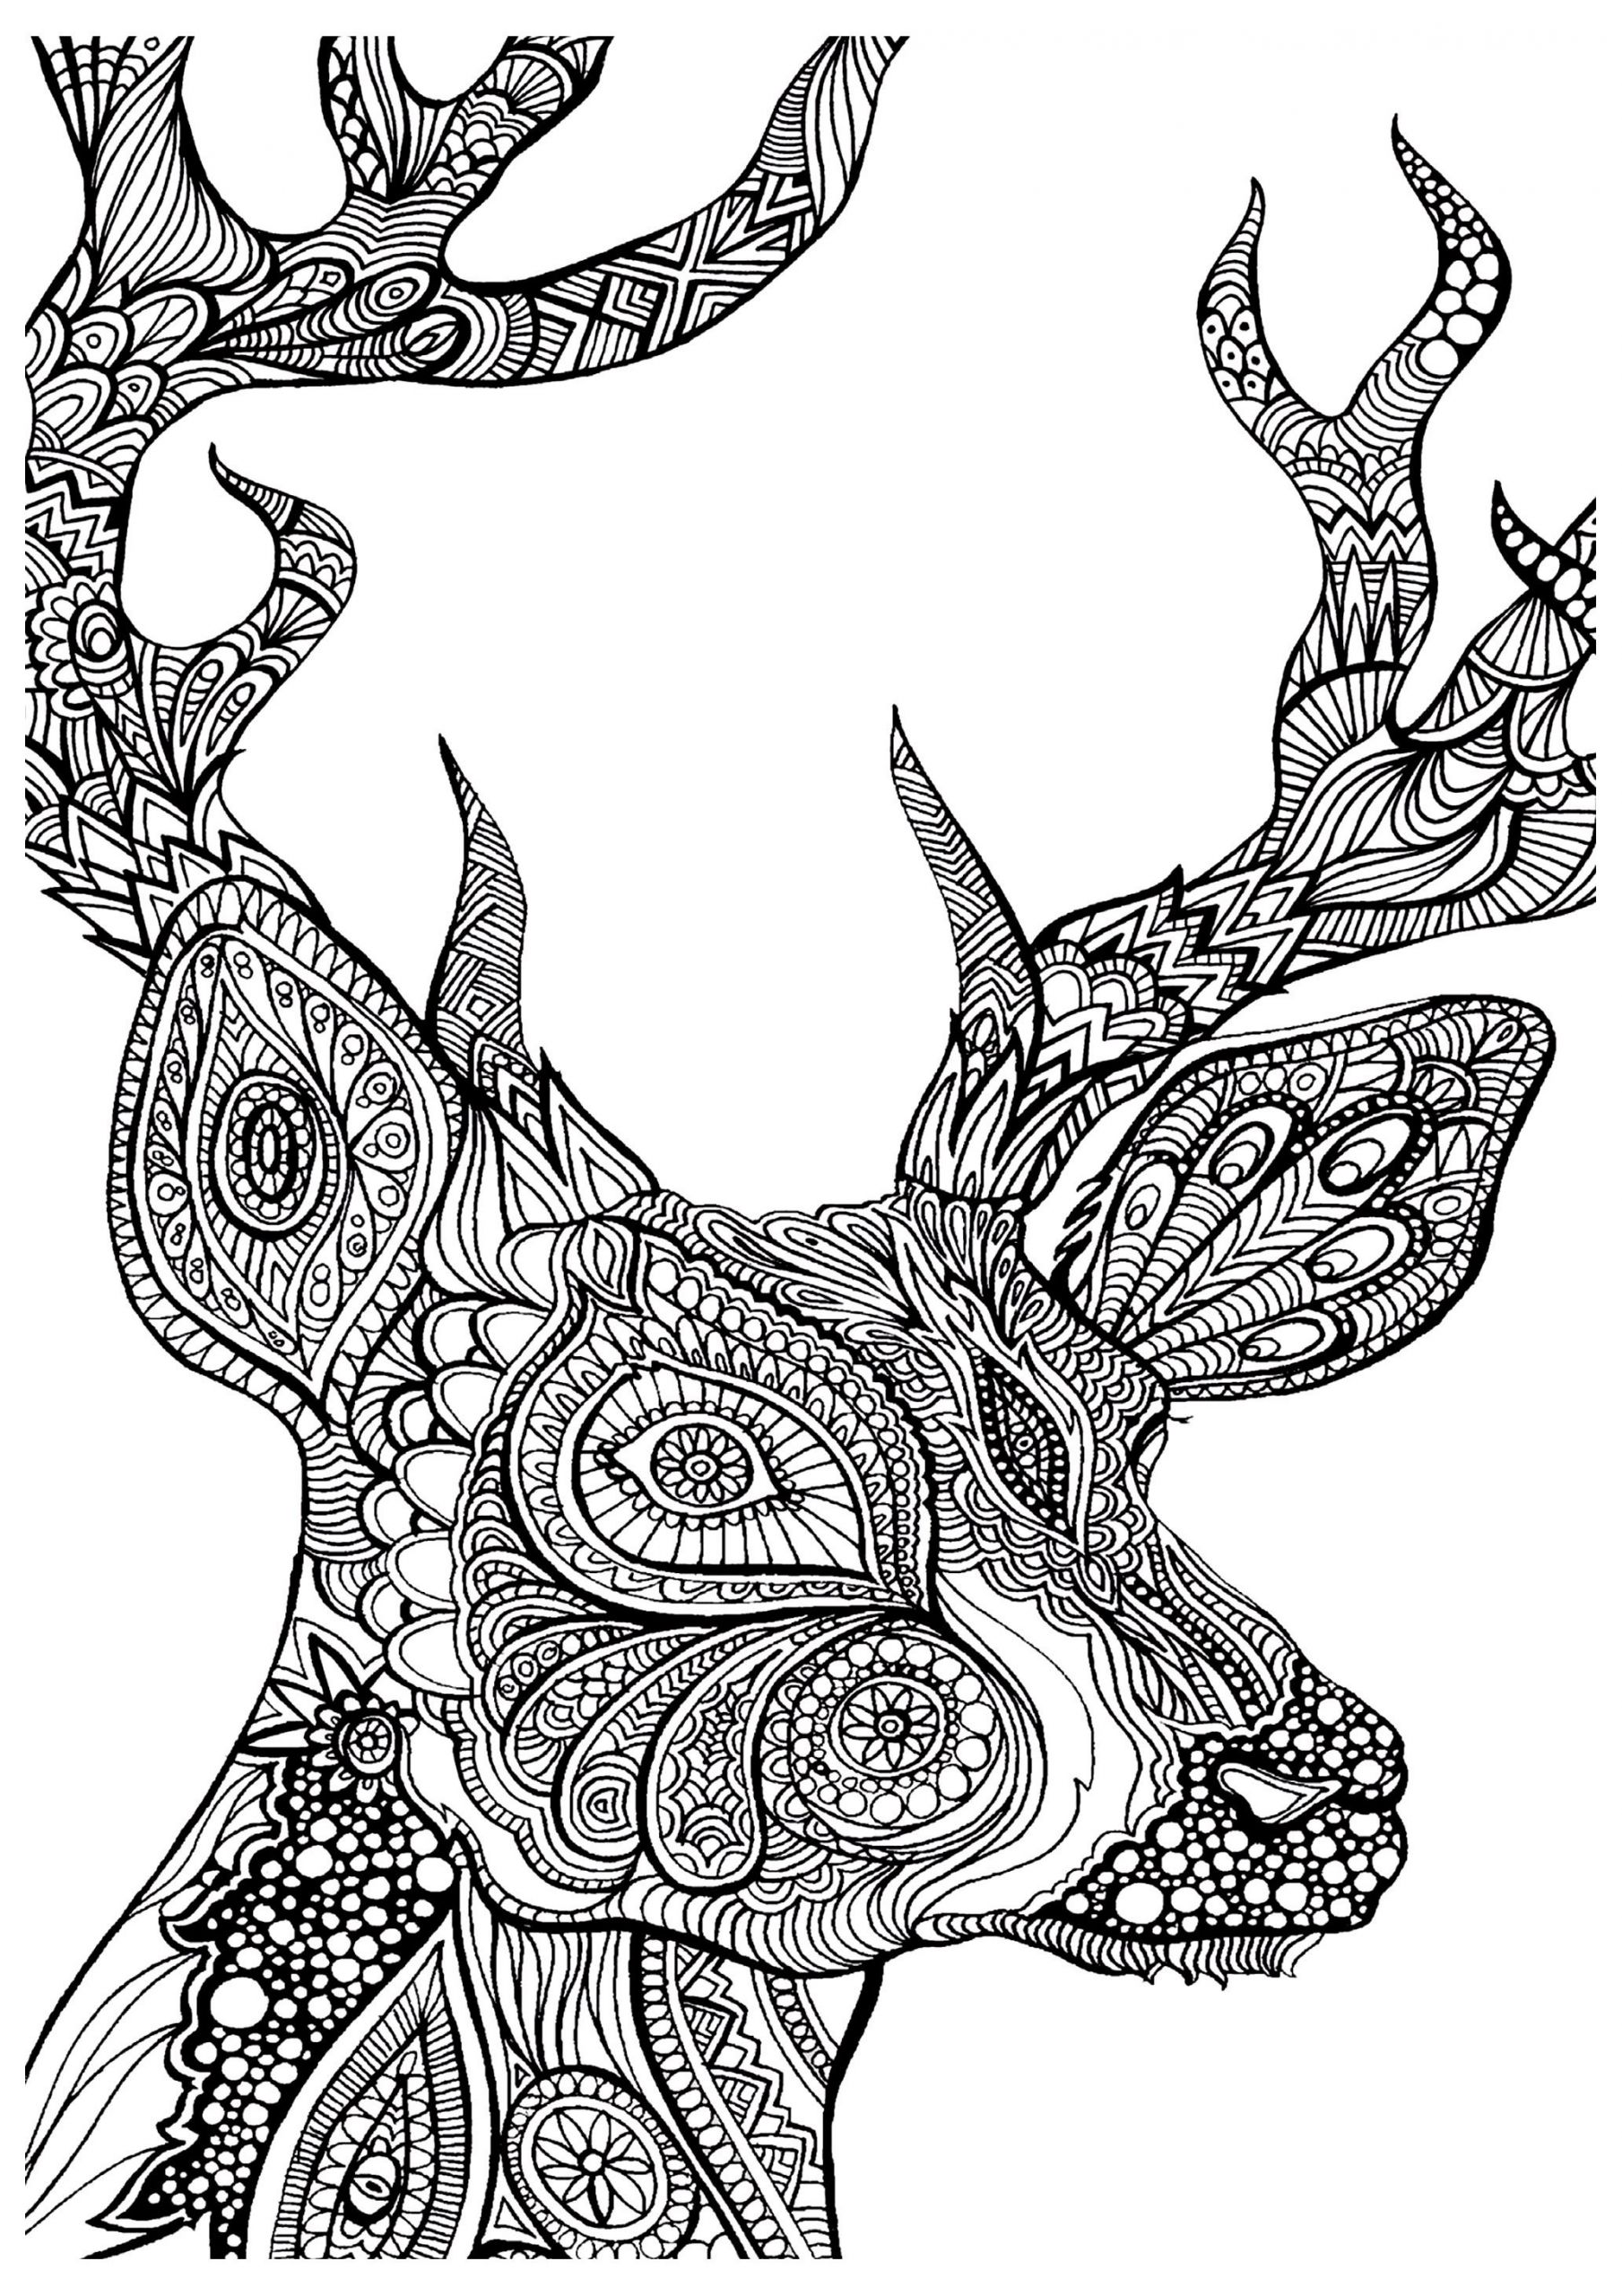 Coloring Pages Adult
 19 of the Best Adult Colouring Pages Free Printables for